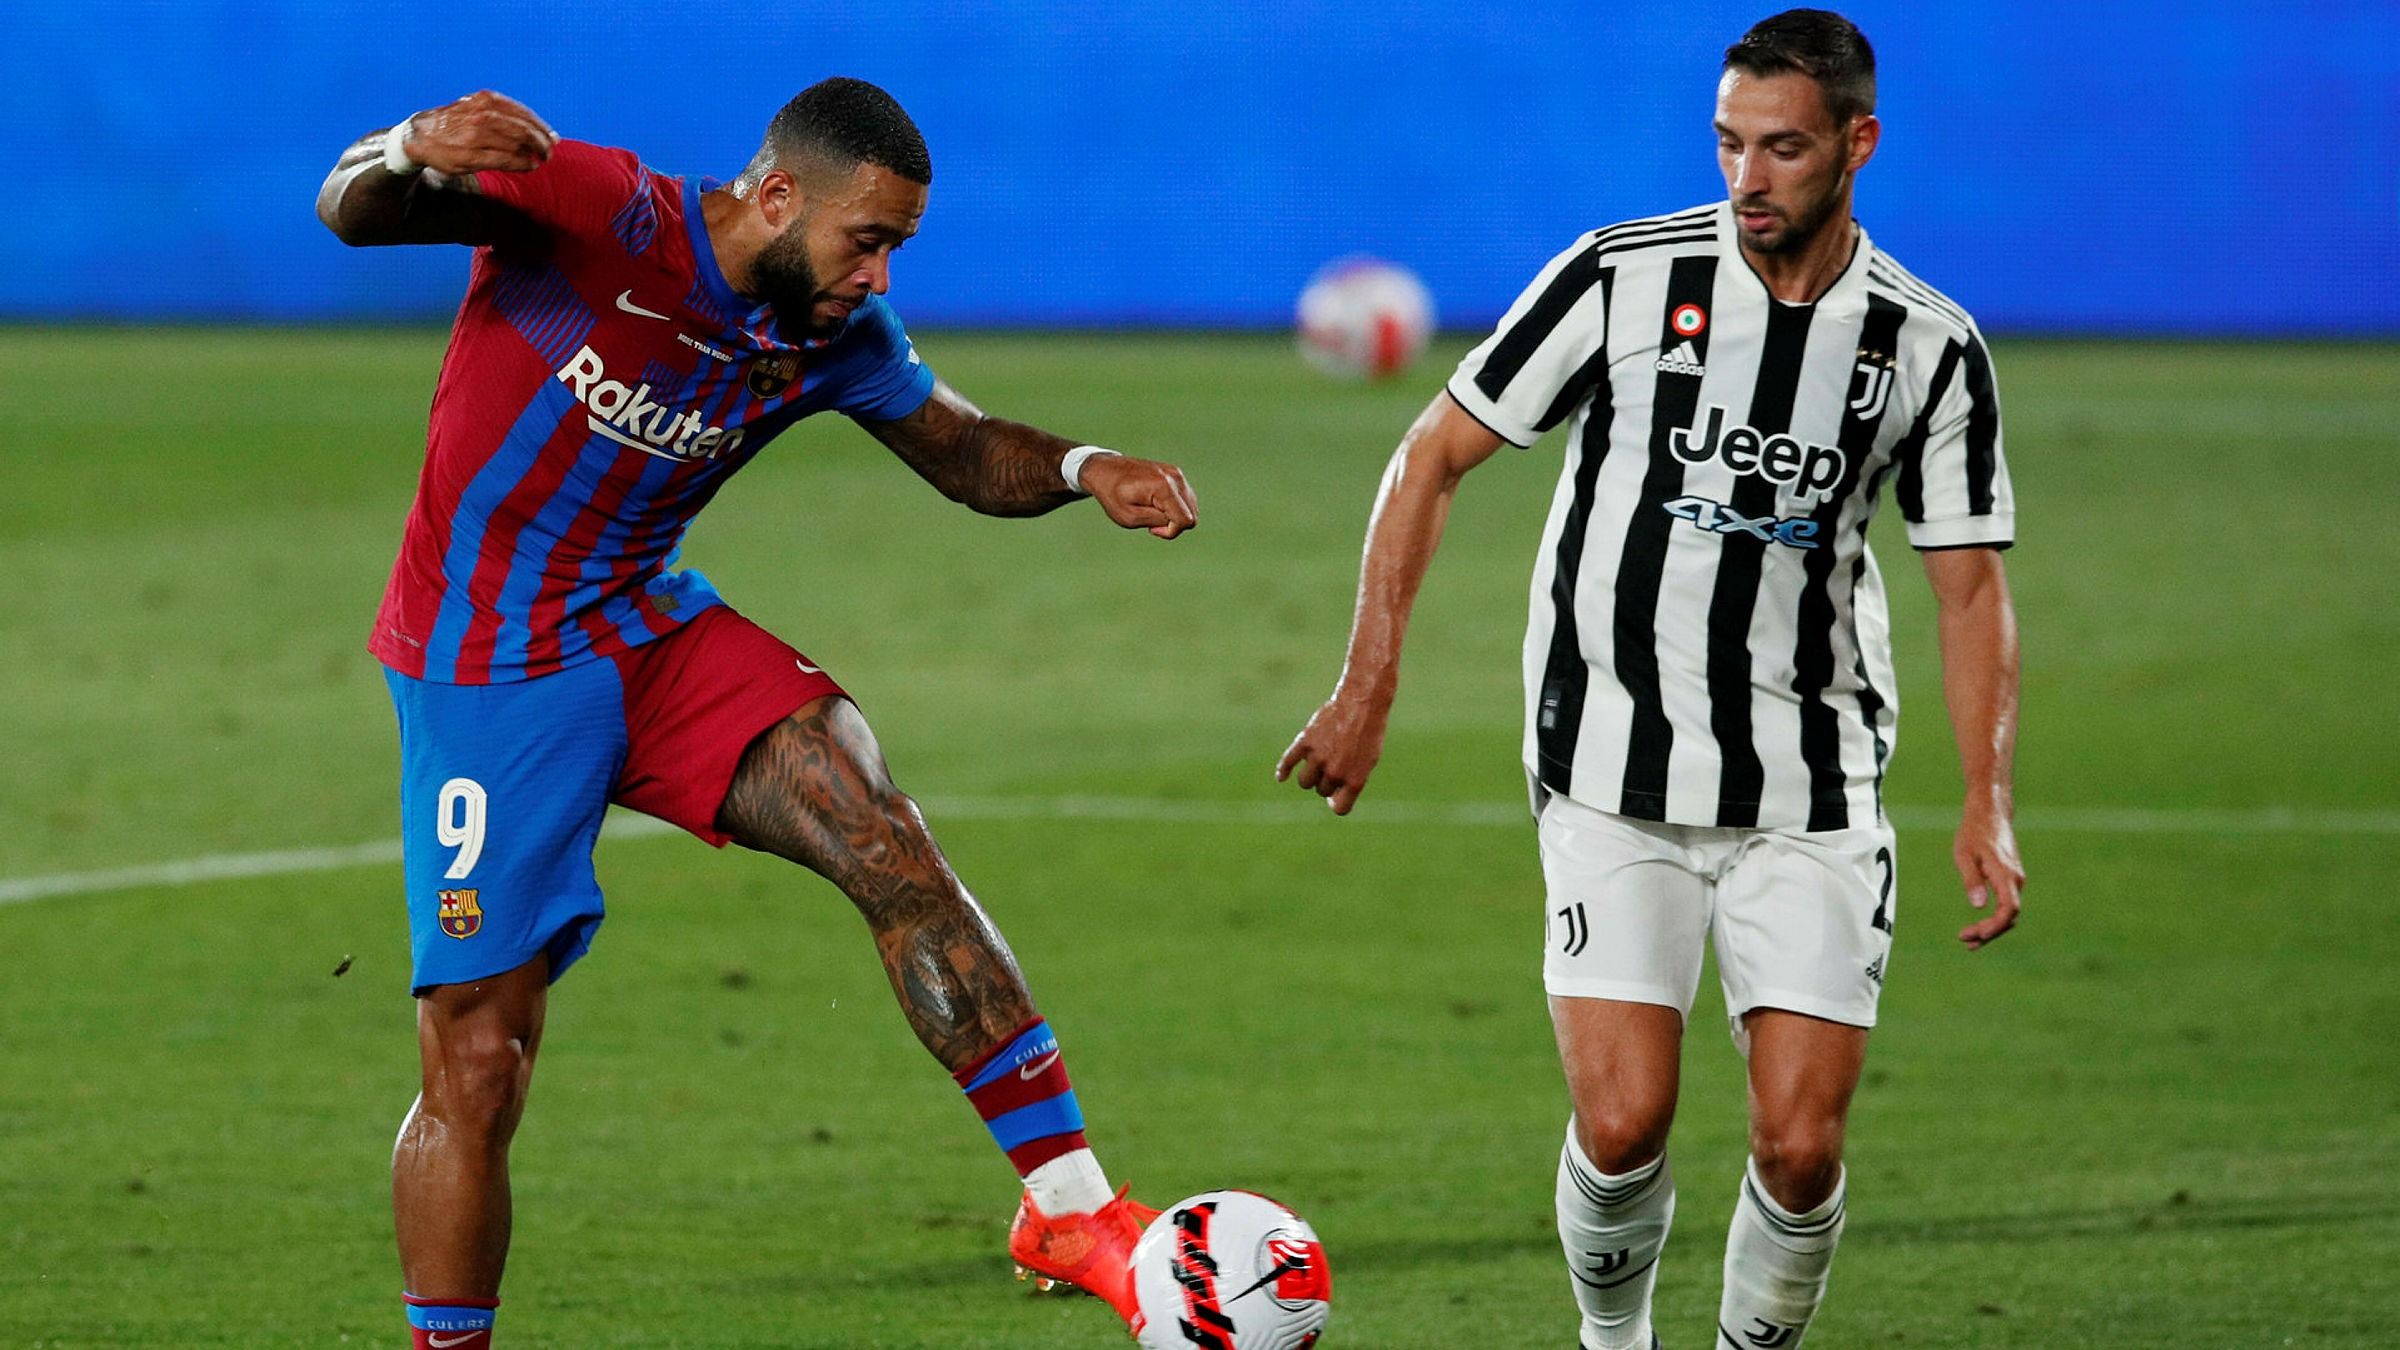 FC Barcelona vs Juventus Match Preview, Where to Watch, Odds and Lineups | July 27